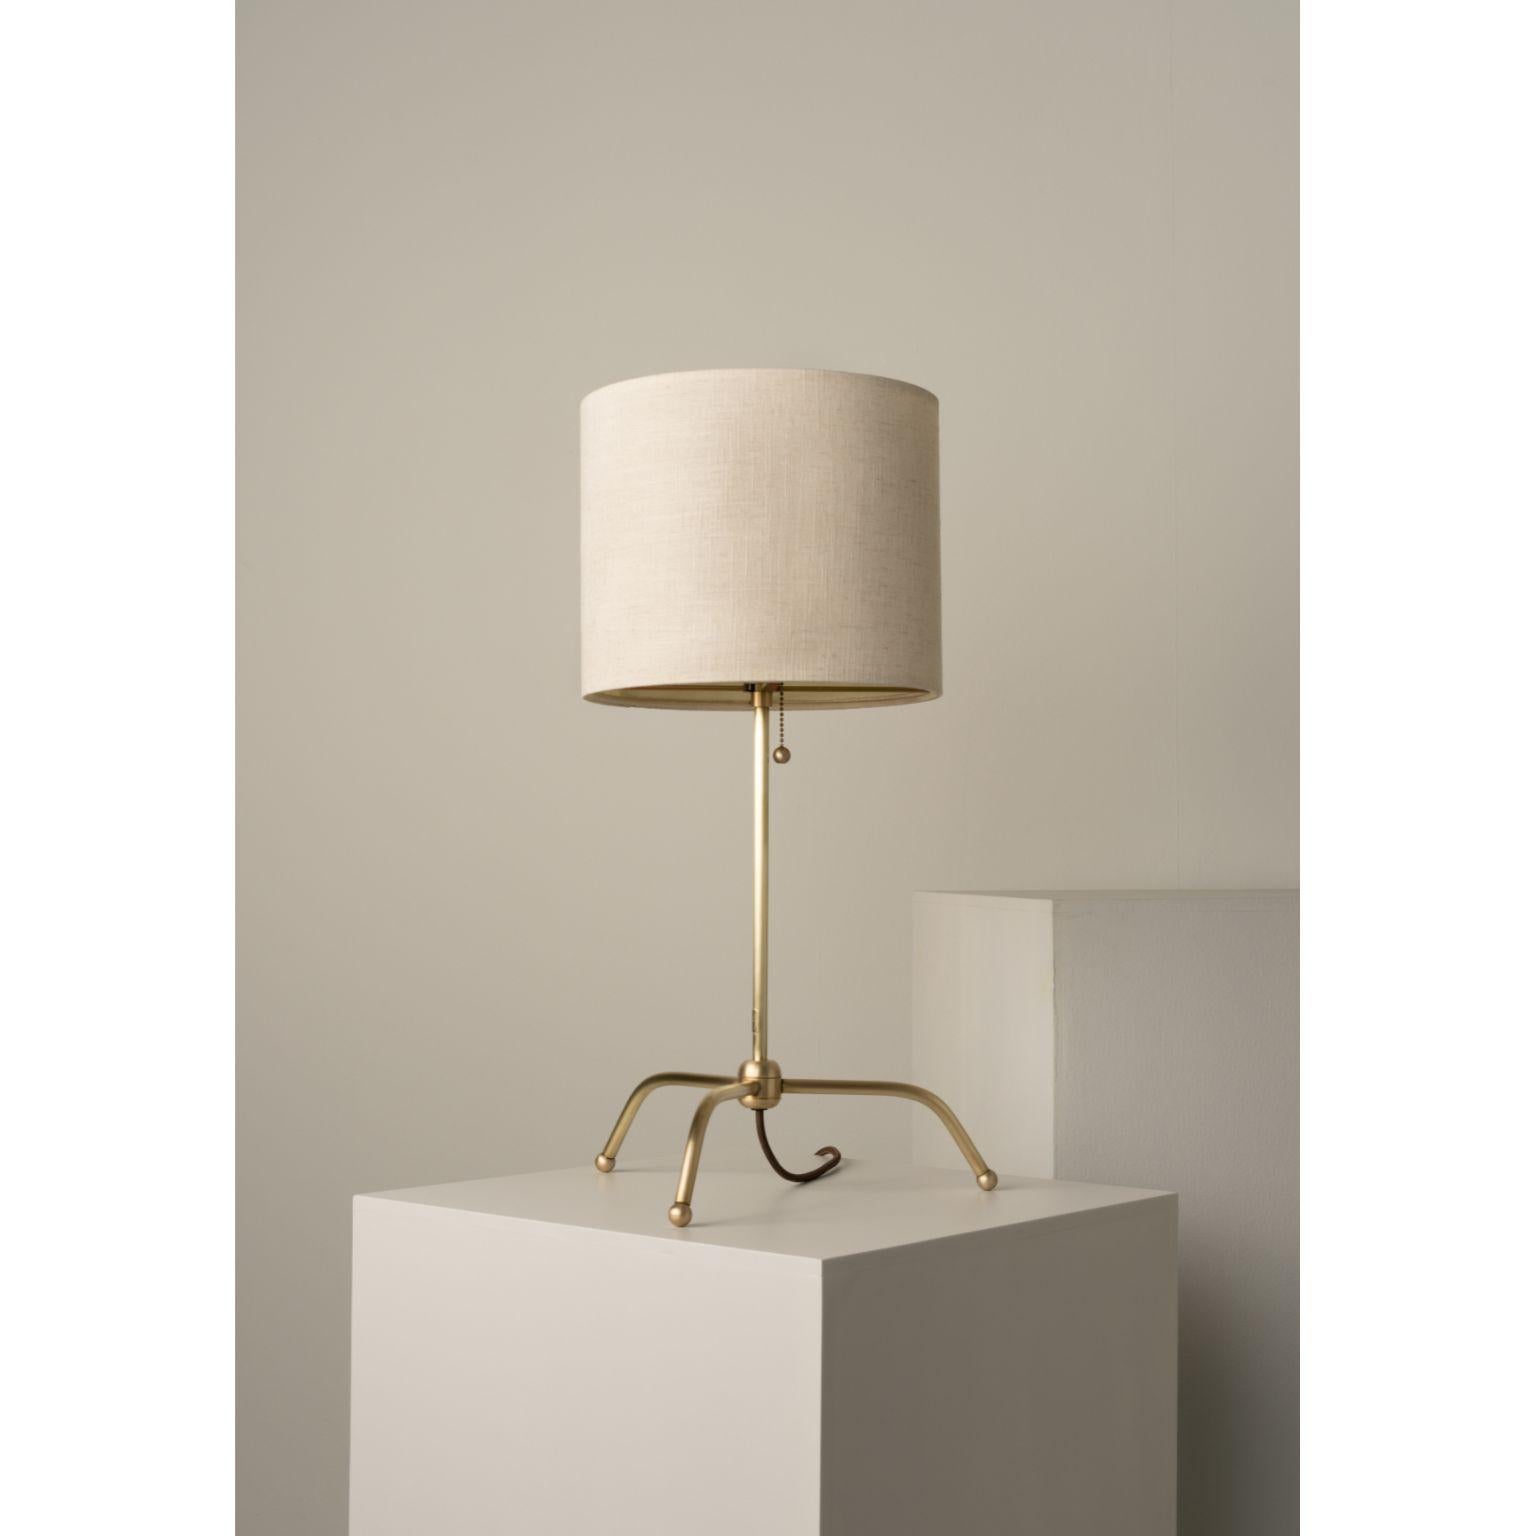 Spider Long Legs Table Lamp by Isabel Moncada
Dimensions: Ø 35.5 x H 66 cm.
Materials: Forged and brushed brass and linen-lined fiberglass lampshade.

Short, discreet, and stable legs. Their strength is lightness. The Ivory linen lets through